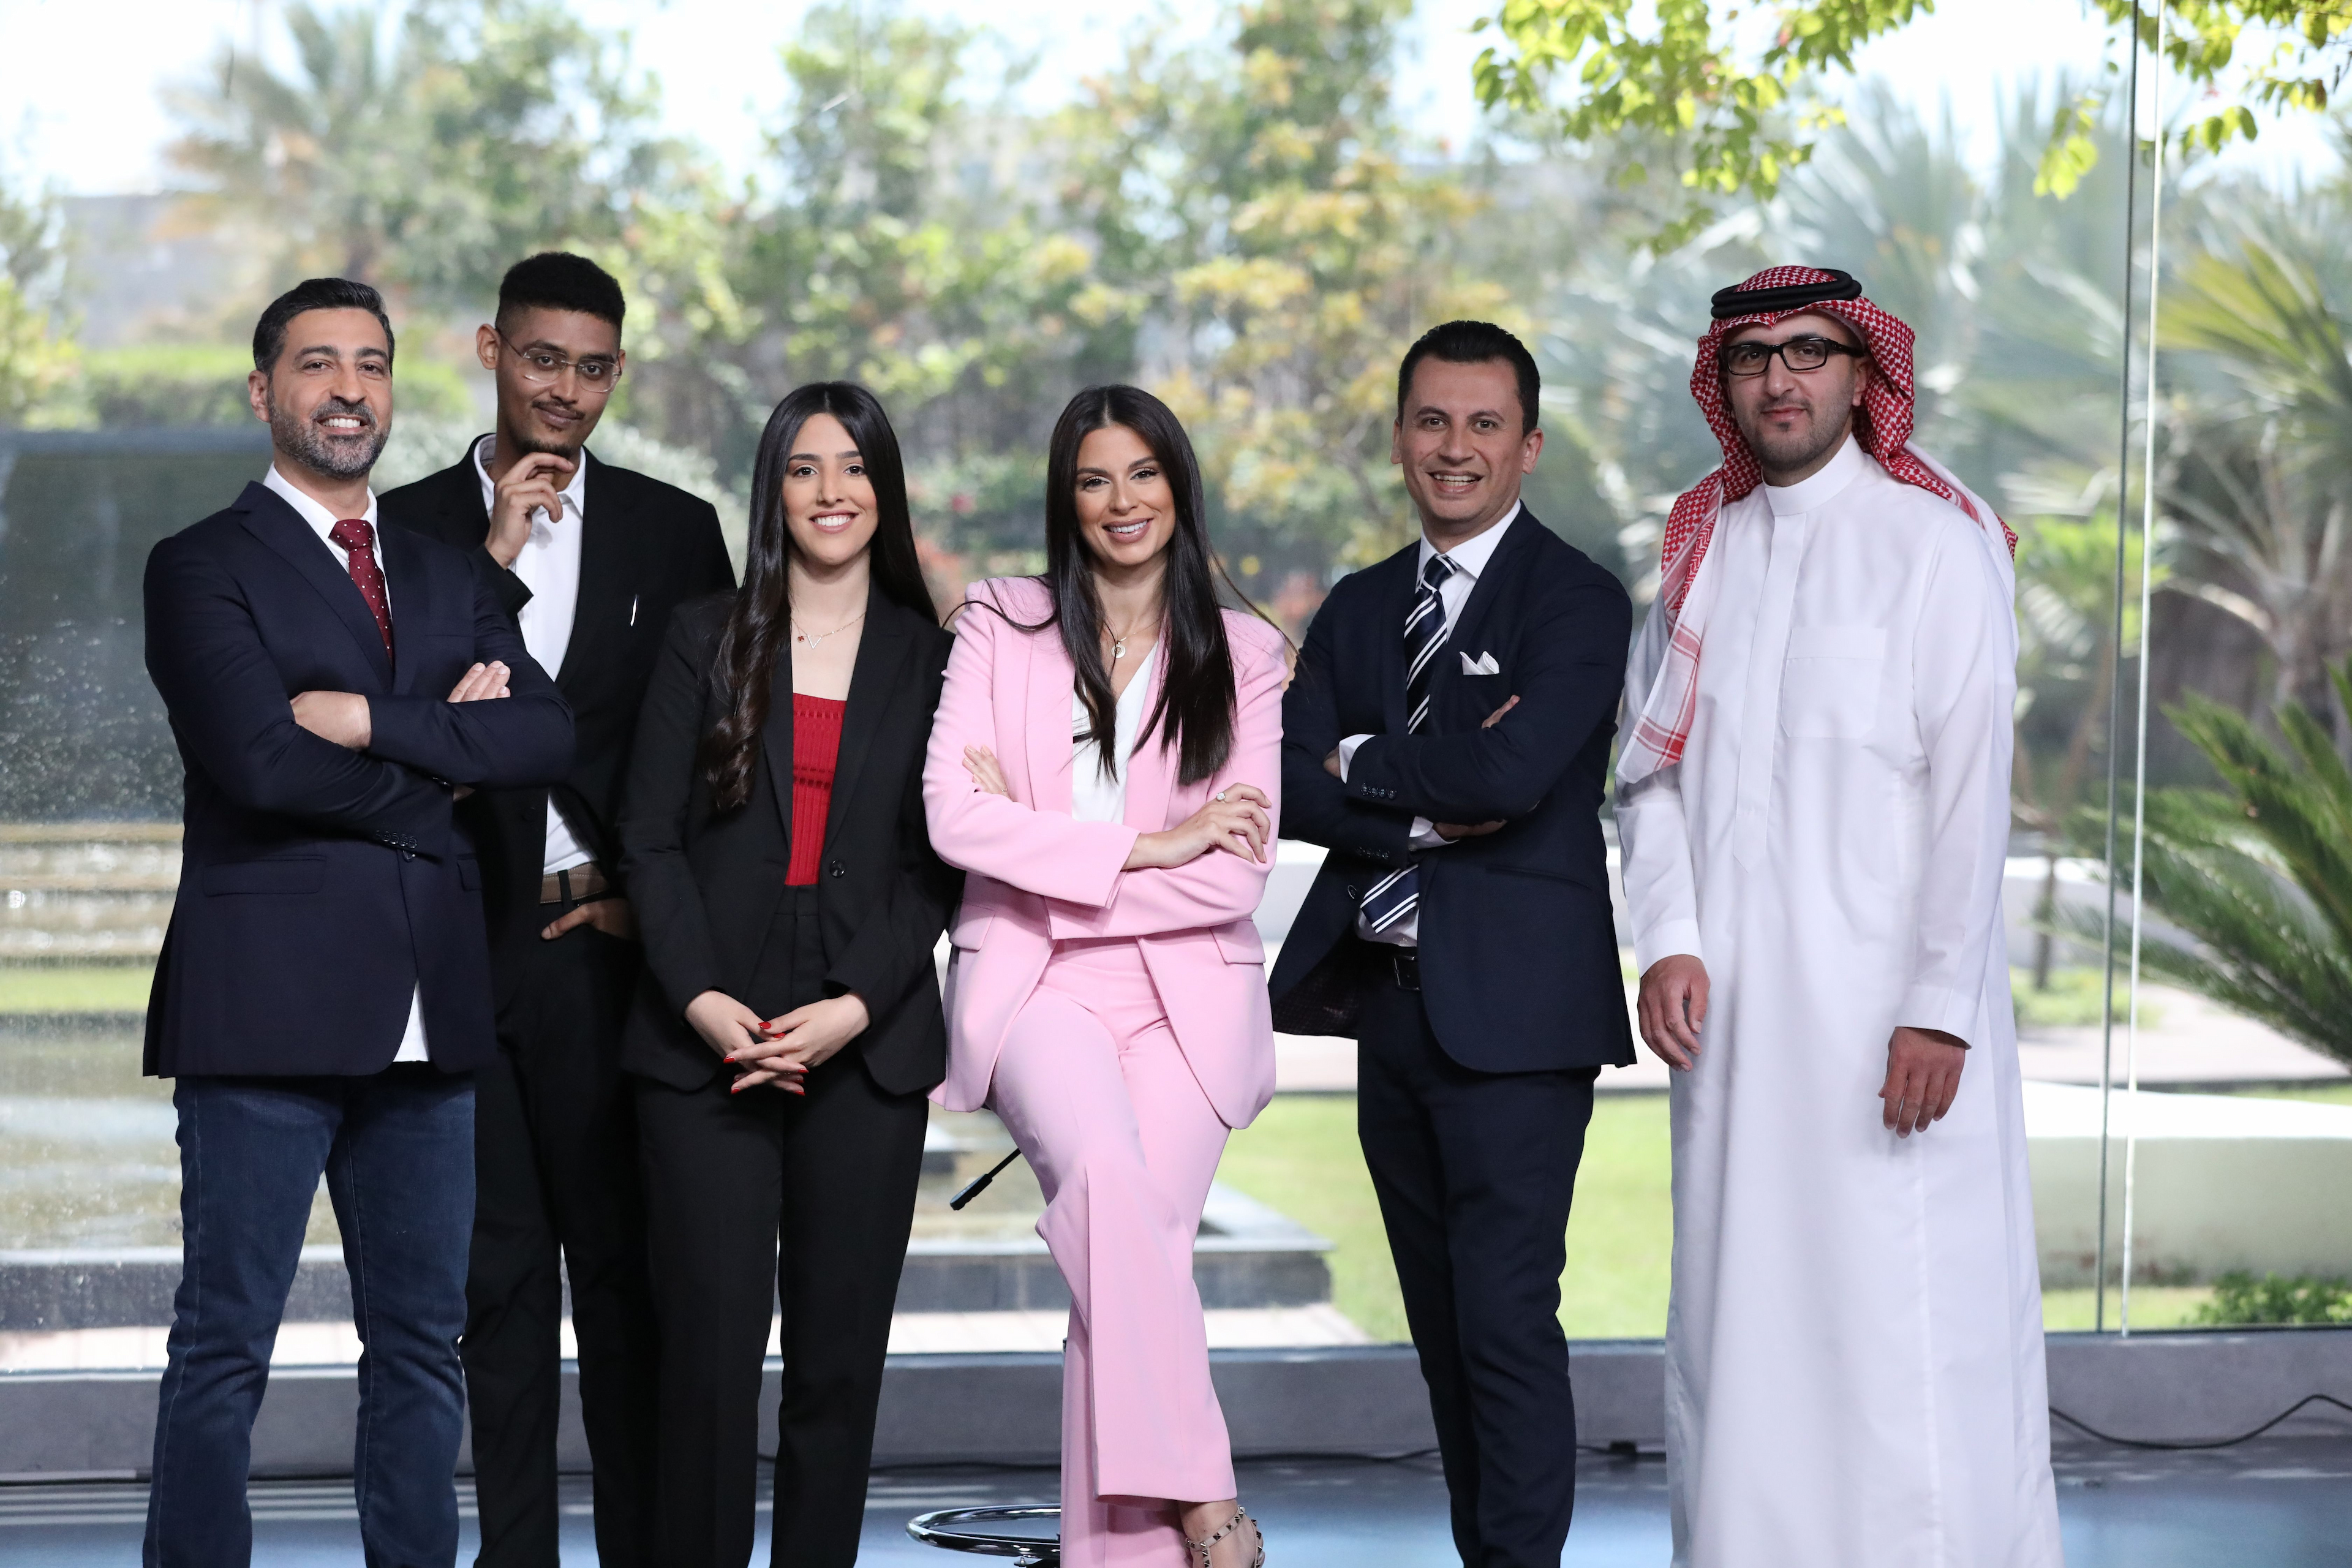 The alumni Sherien Hajjat - Here is our alumni's experience with Sky News Arabia Academy courses